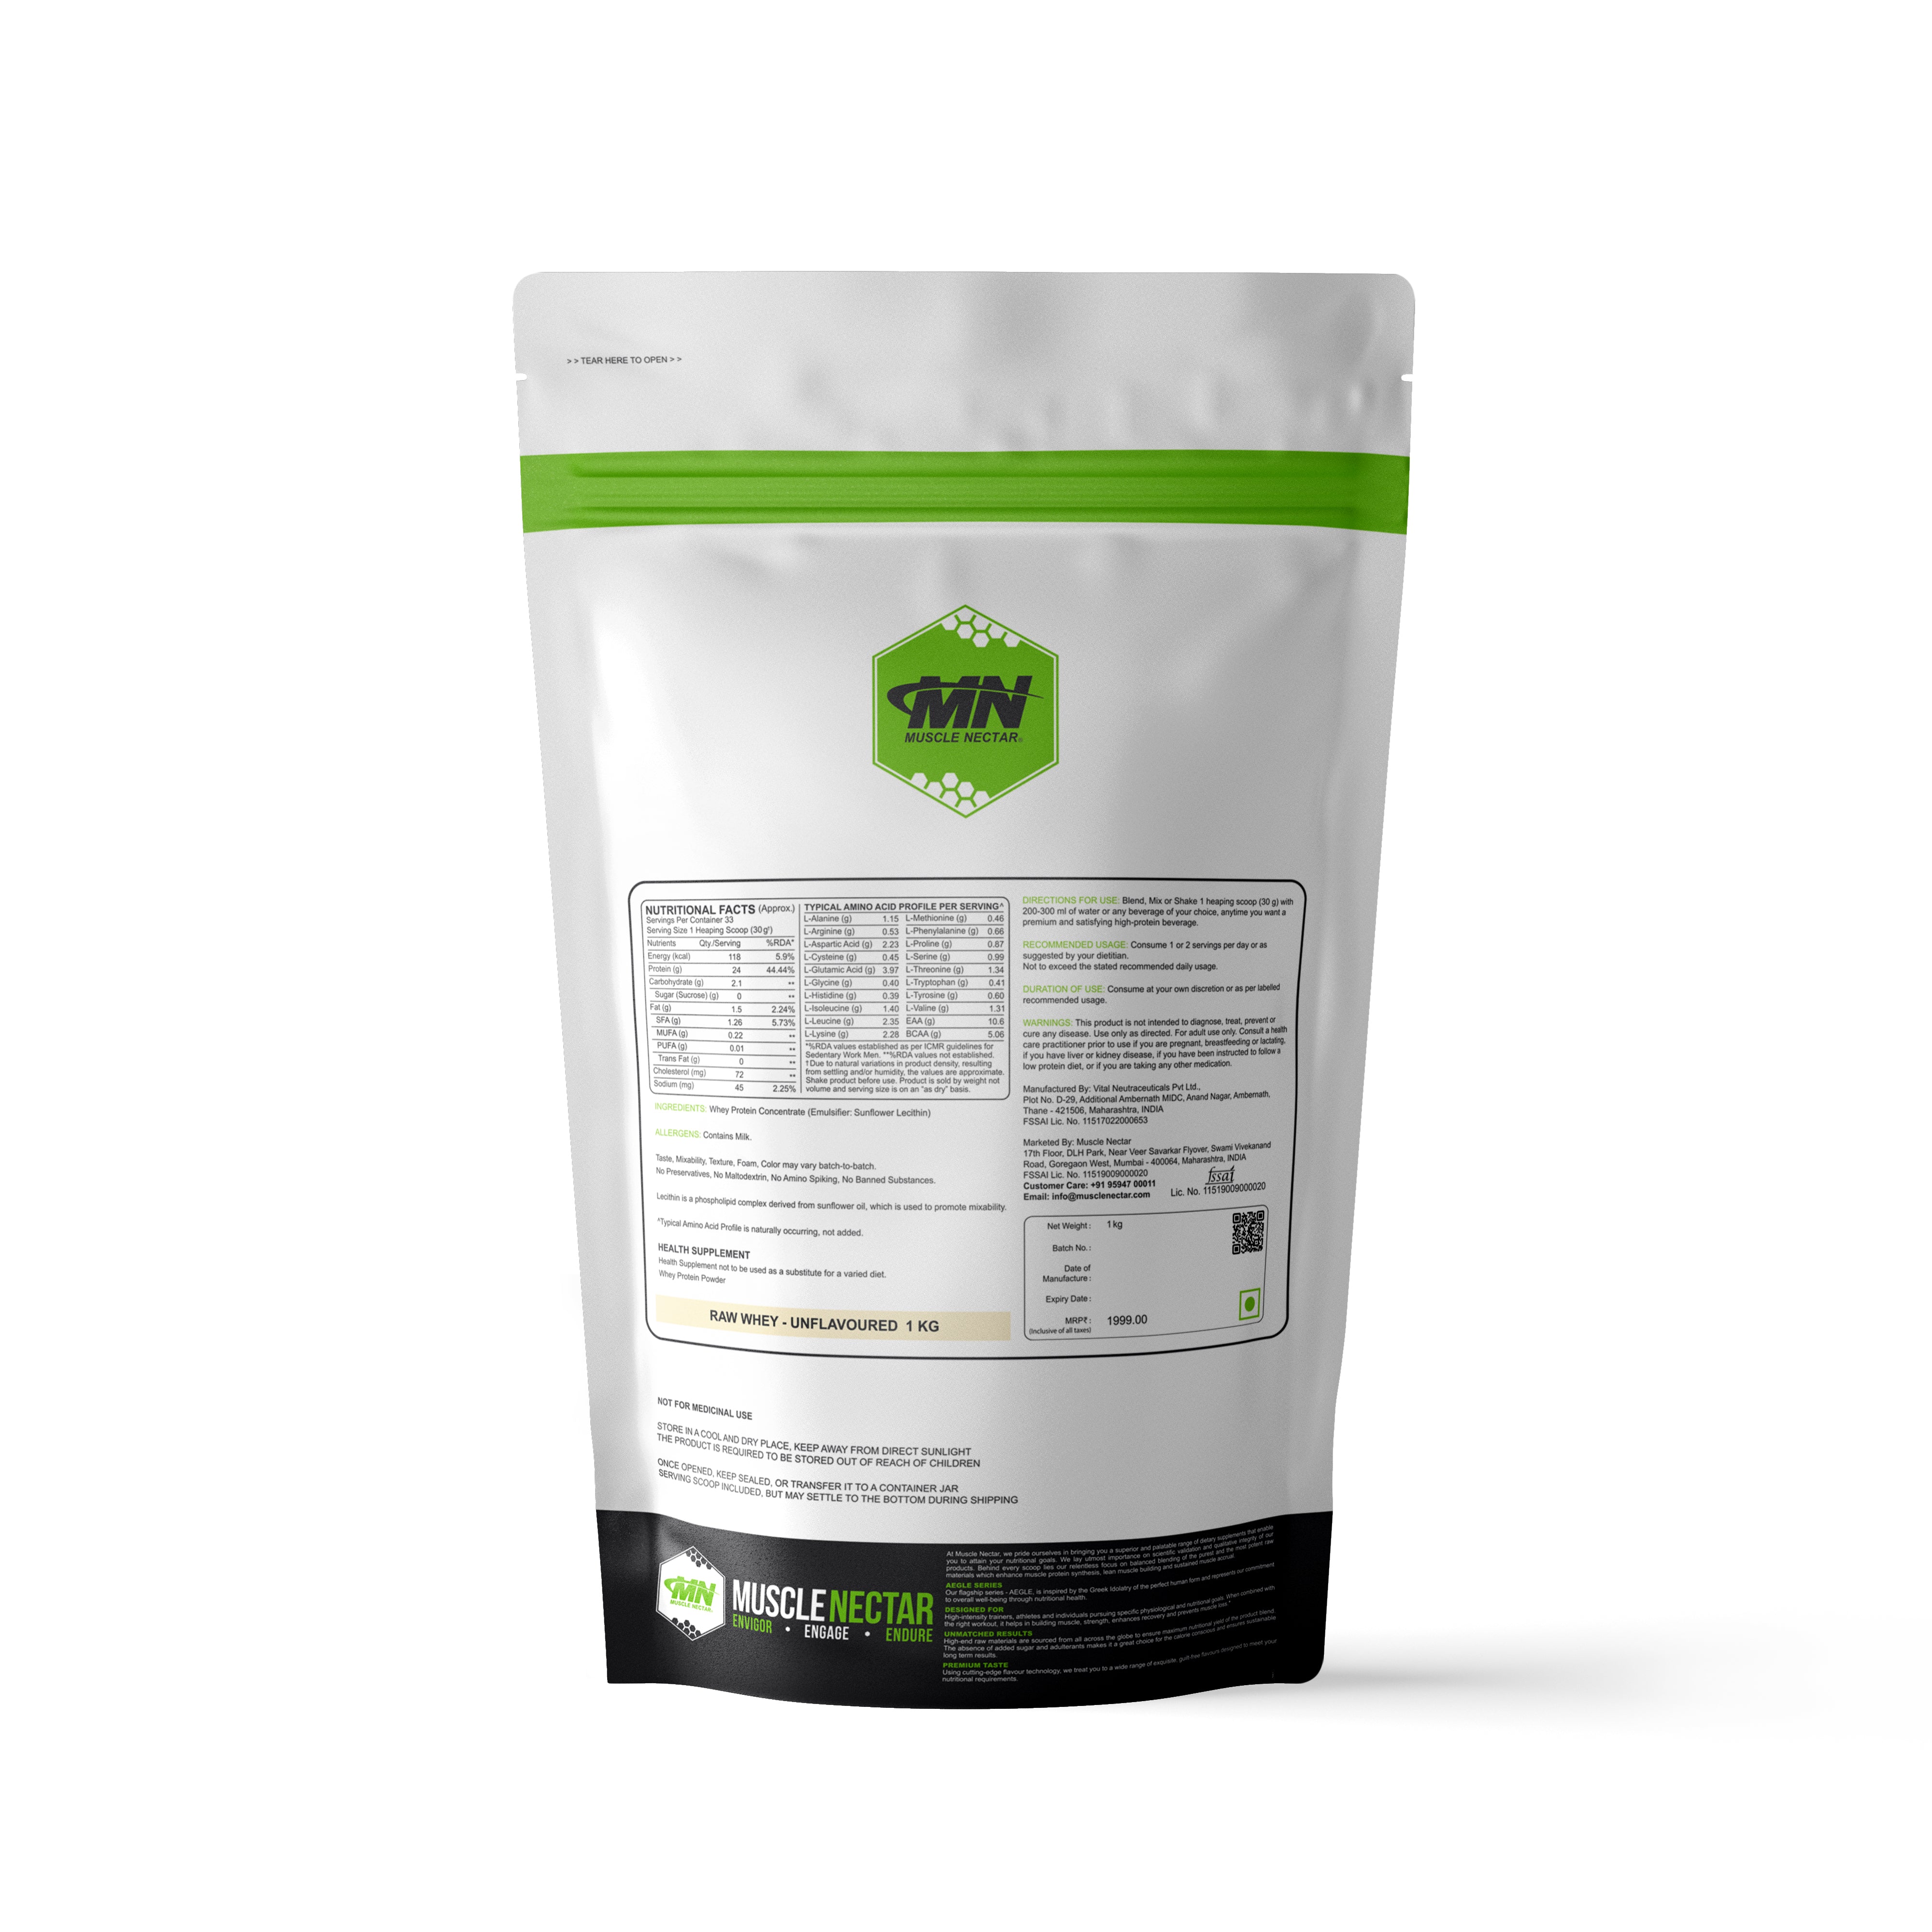 Raw Whey Protein Concentrate, Unflavored